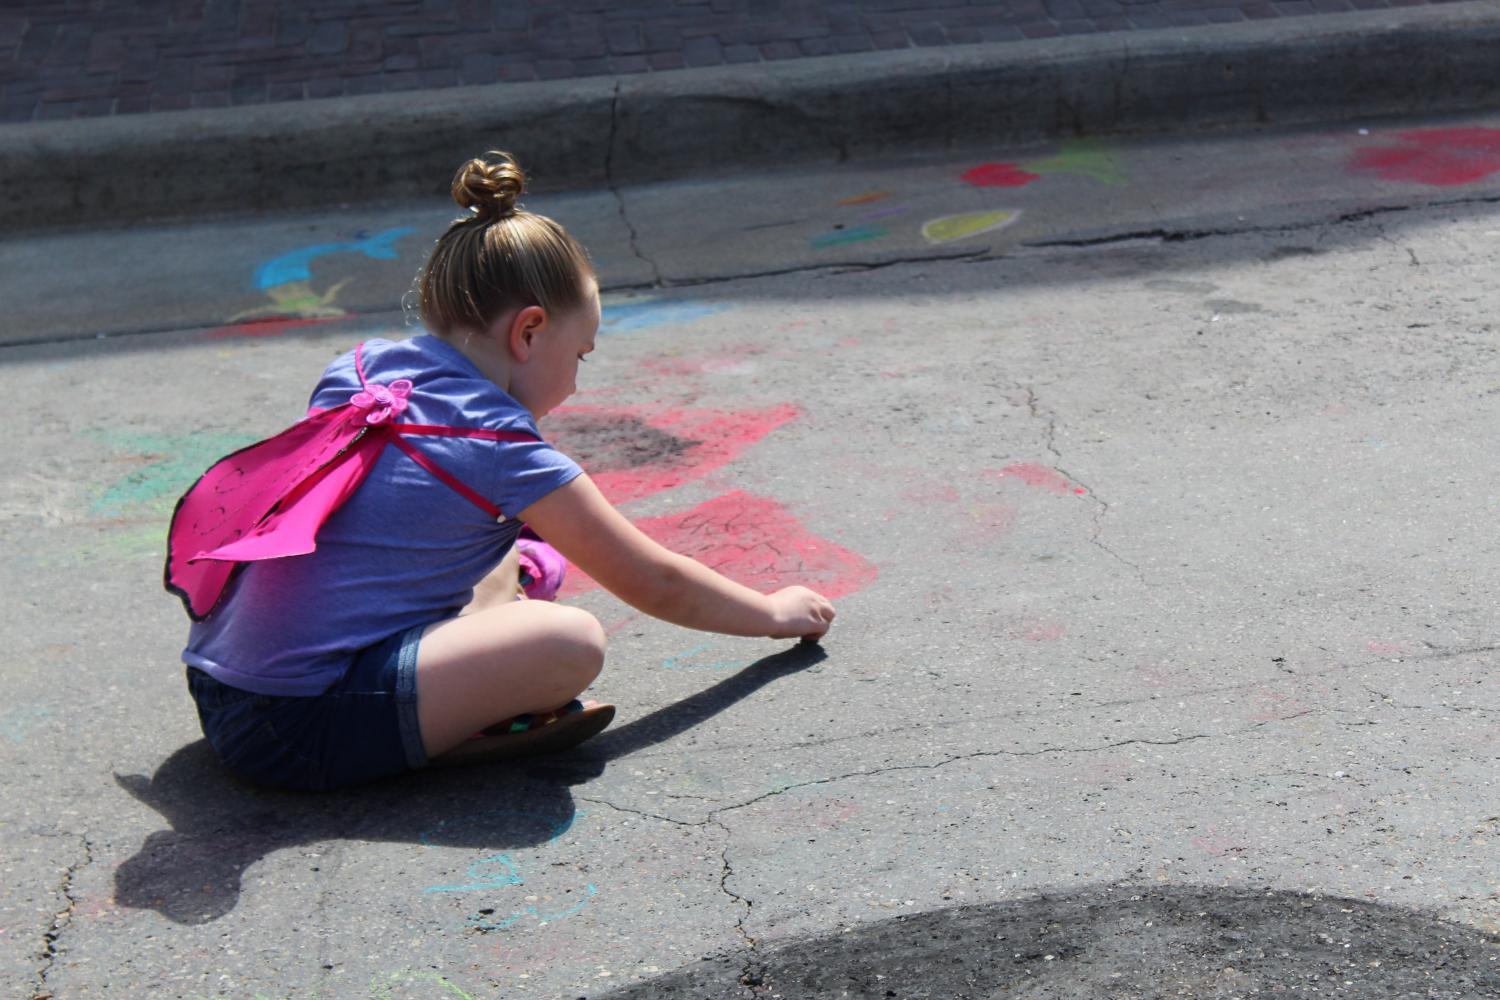 A girl chalks a picture on the pavement. Everywhere on the street, kids and adults were creating chalk art.